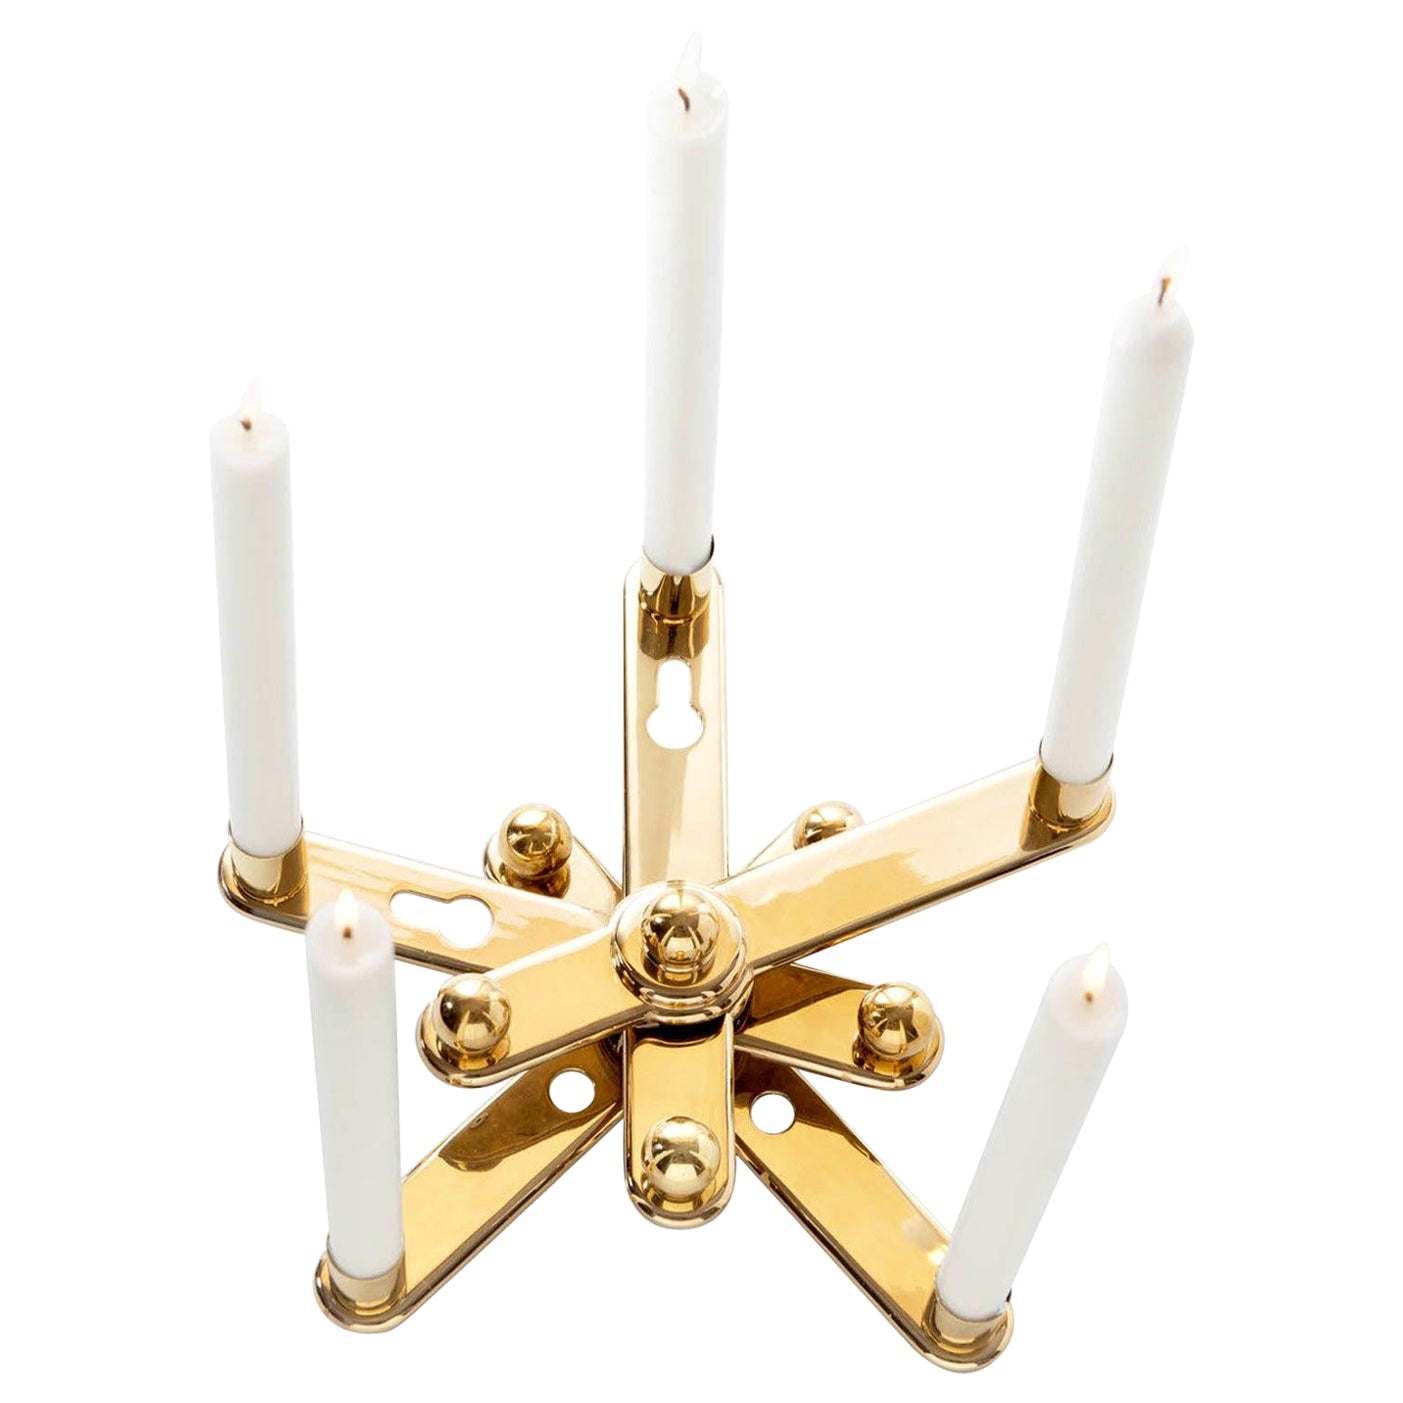 Curro Claret Contemporary Candleholder Brass Limited Edition